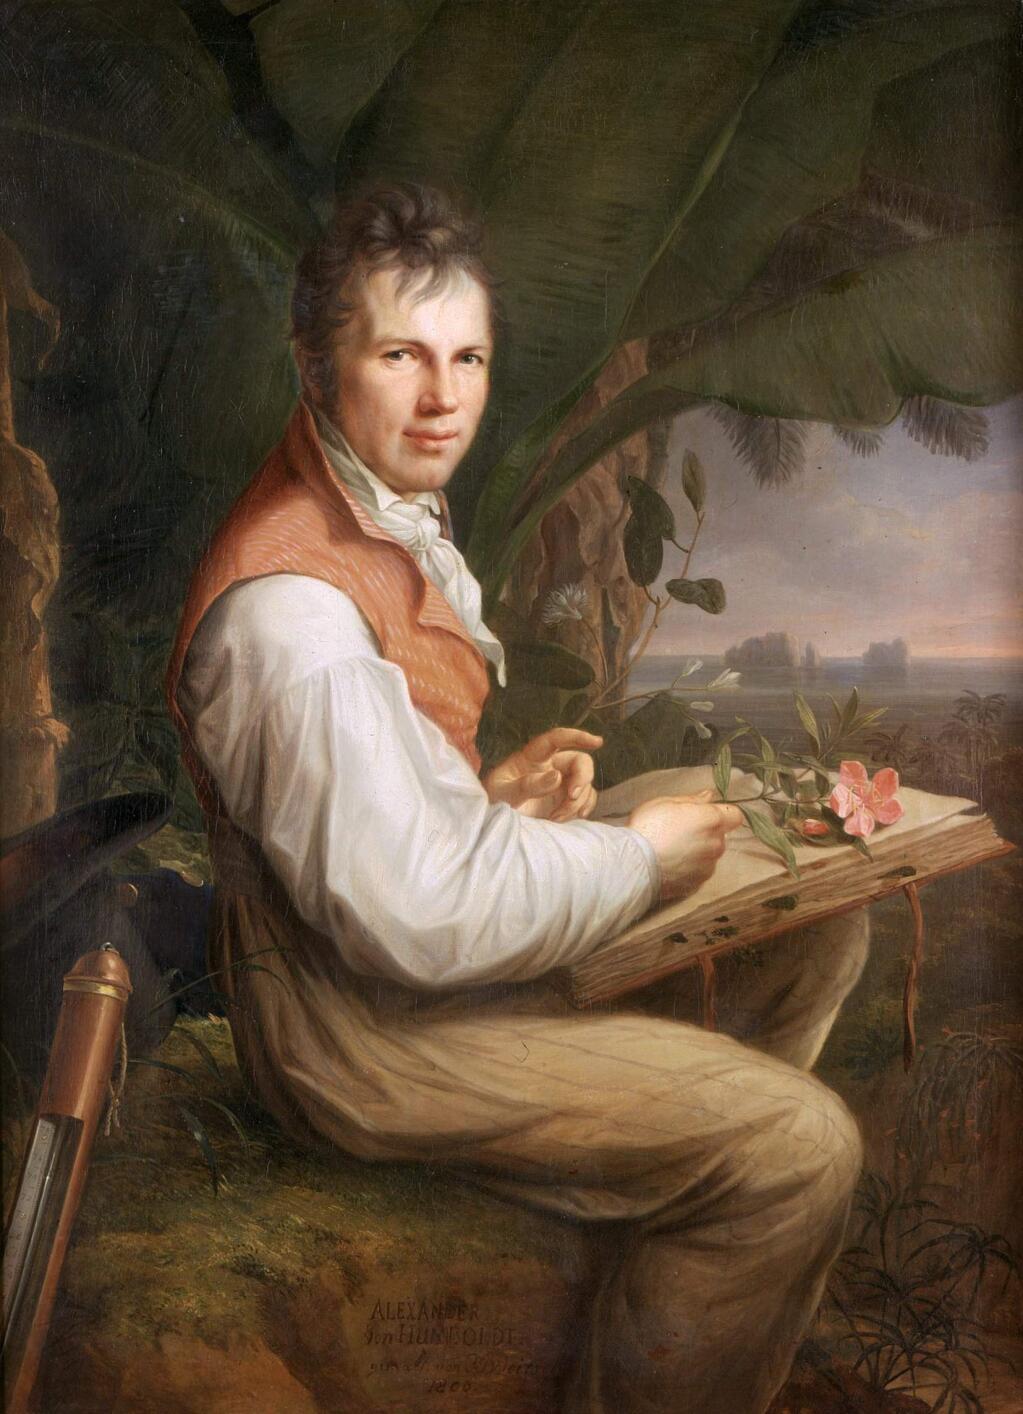 Alexander von Humboldt in 1806, following his South American travels; by Friedrich Georg Weitsch. Humboldt's life and influence will be discussed at Quarryhill Botanical Gardens by biographer Andrea Wulf on Oct. 13. (Public Domain, Wikipedia Commons)